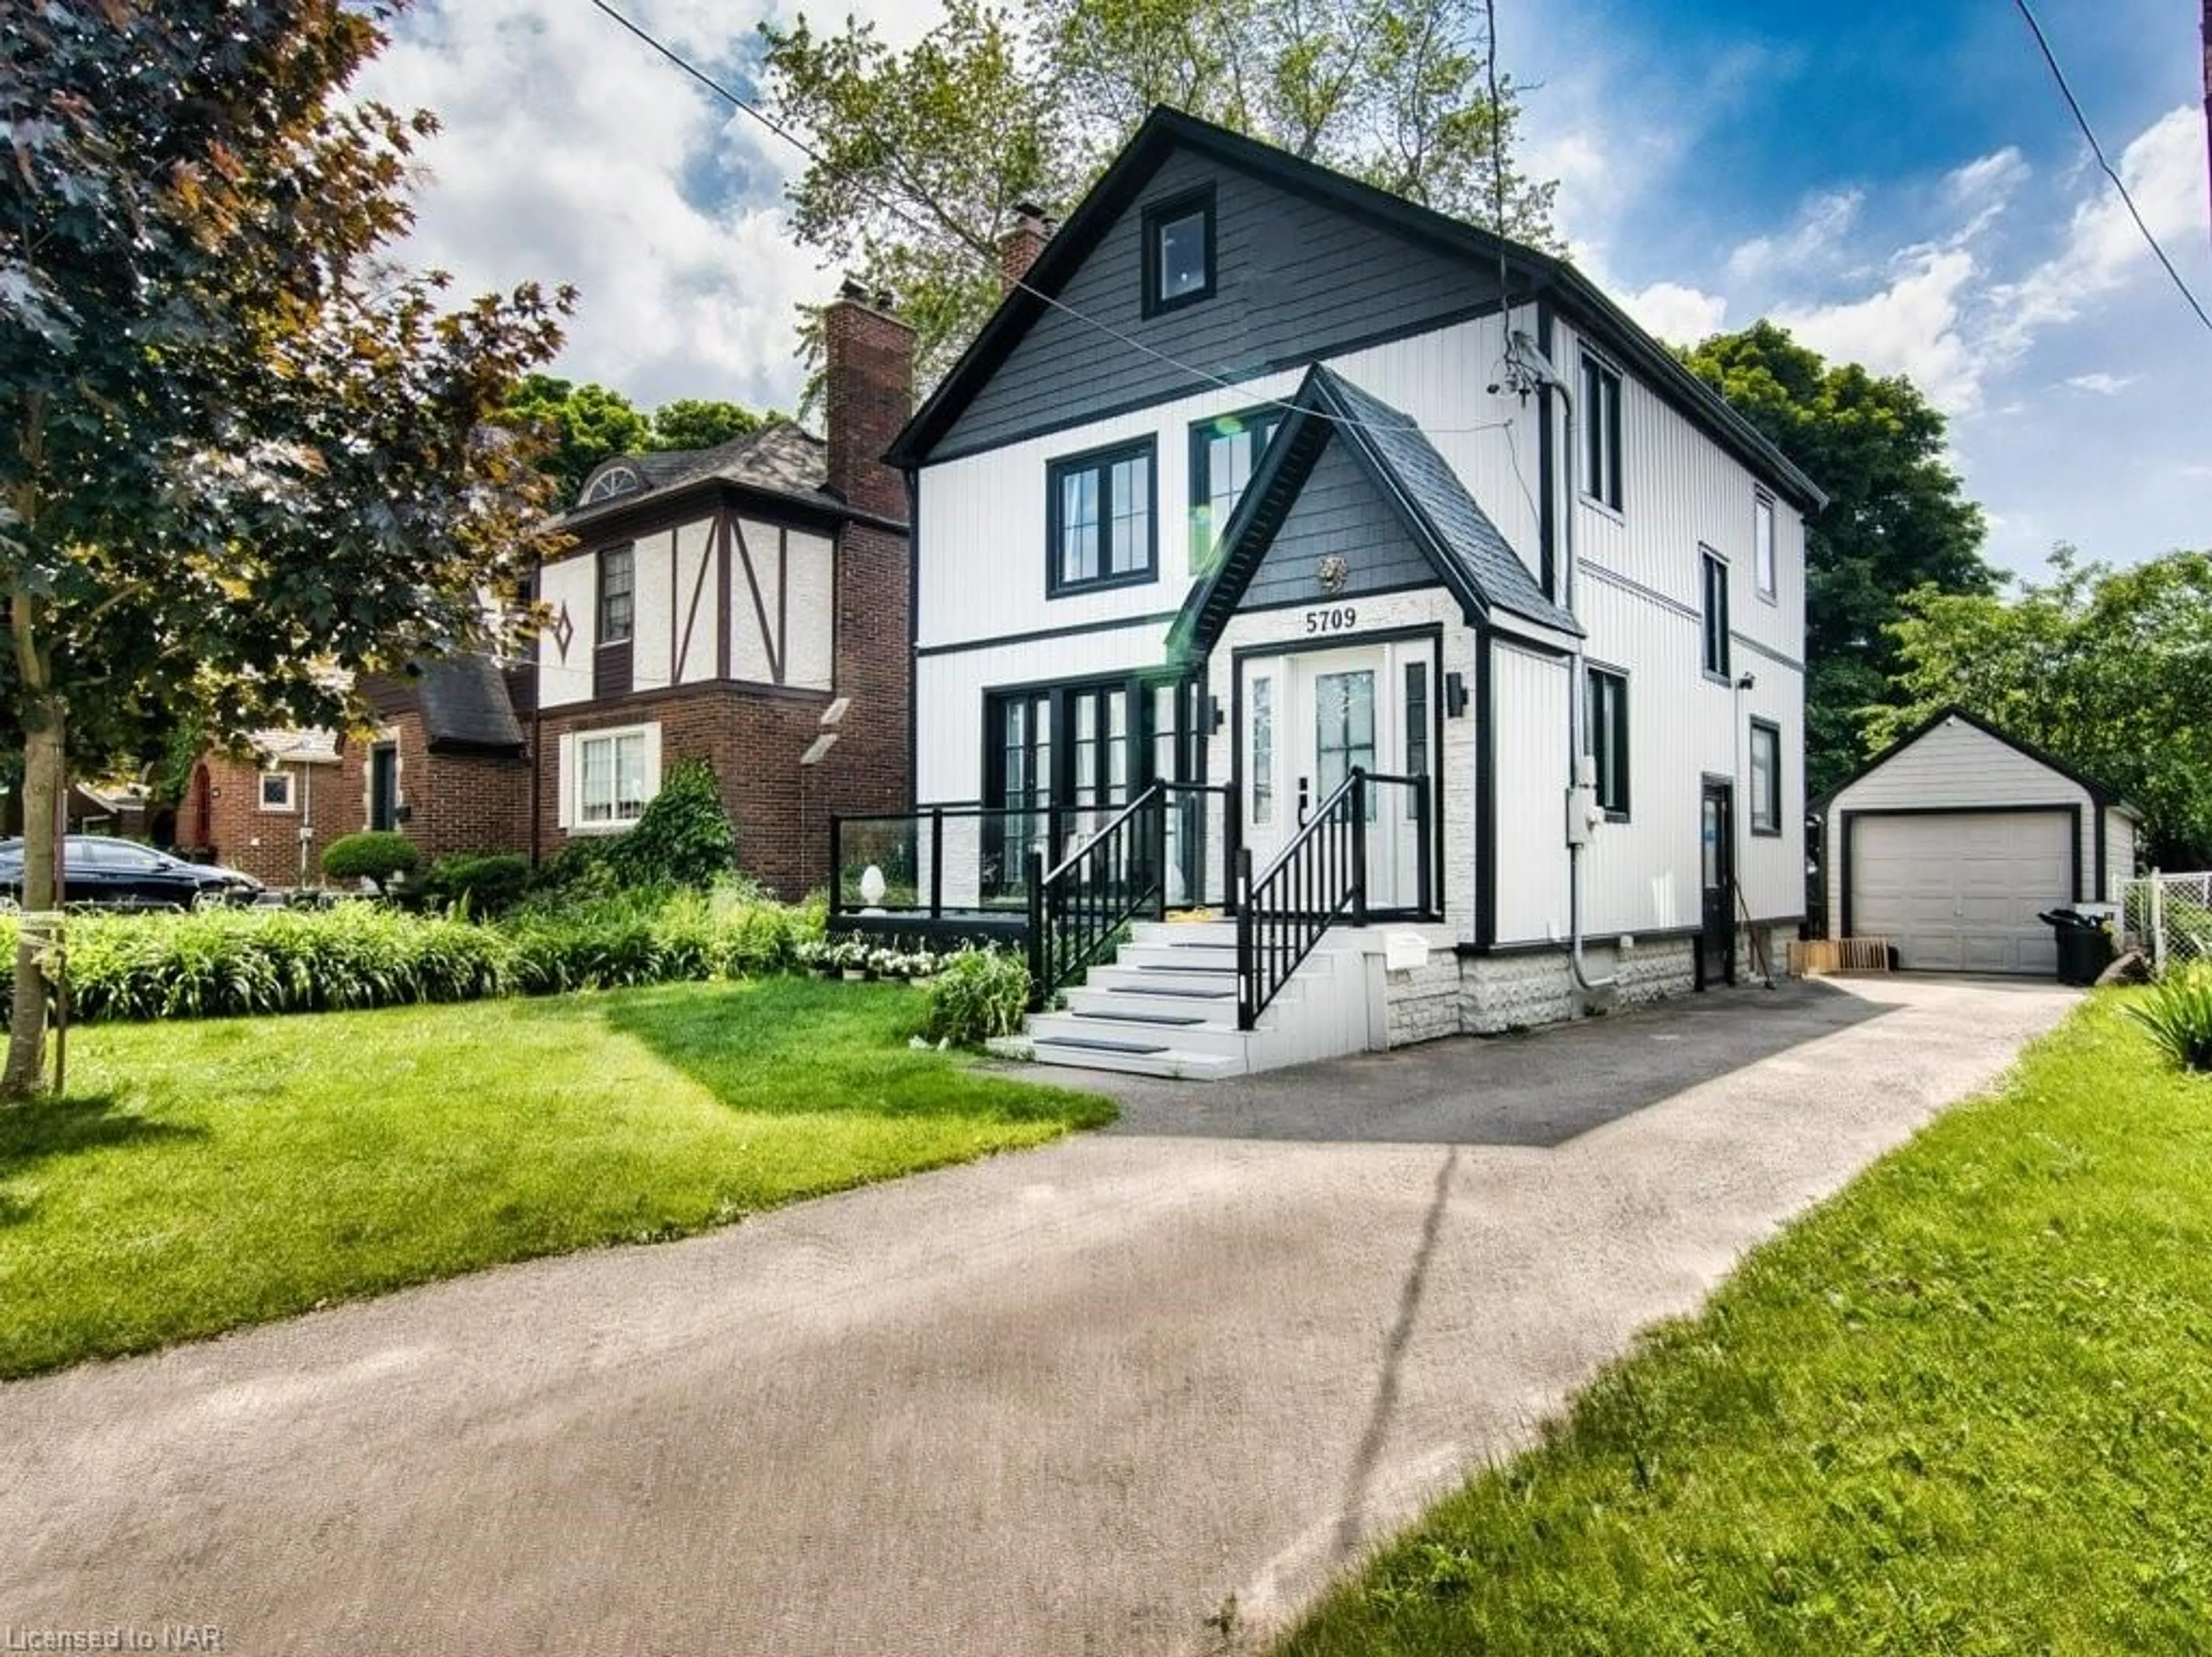 Frontside or backside of a home for 5709 Dorchester Rd, Niagara Falls Ontario L2G 5S5